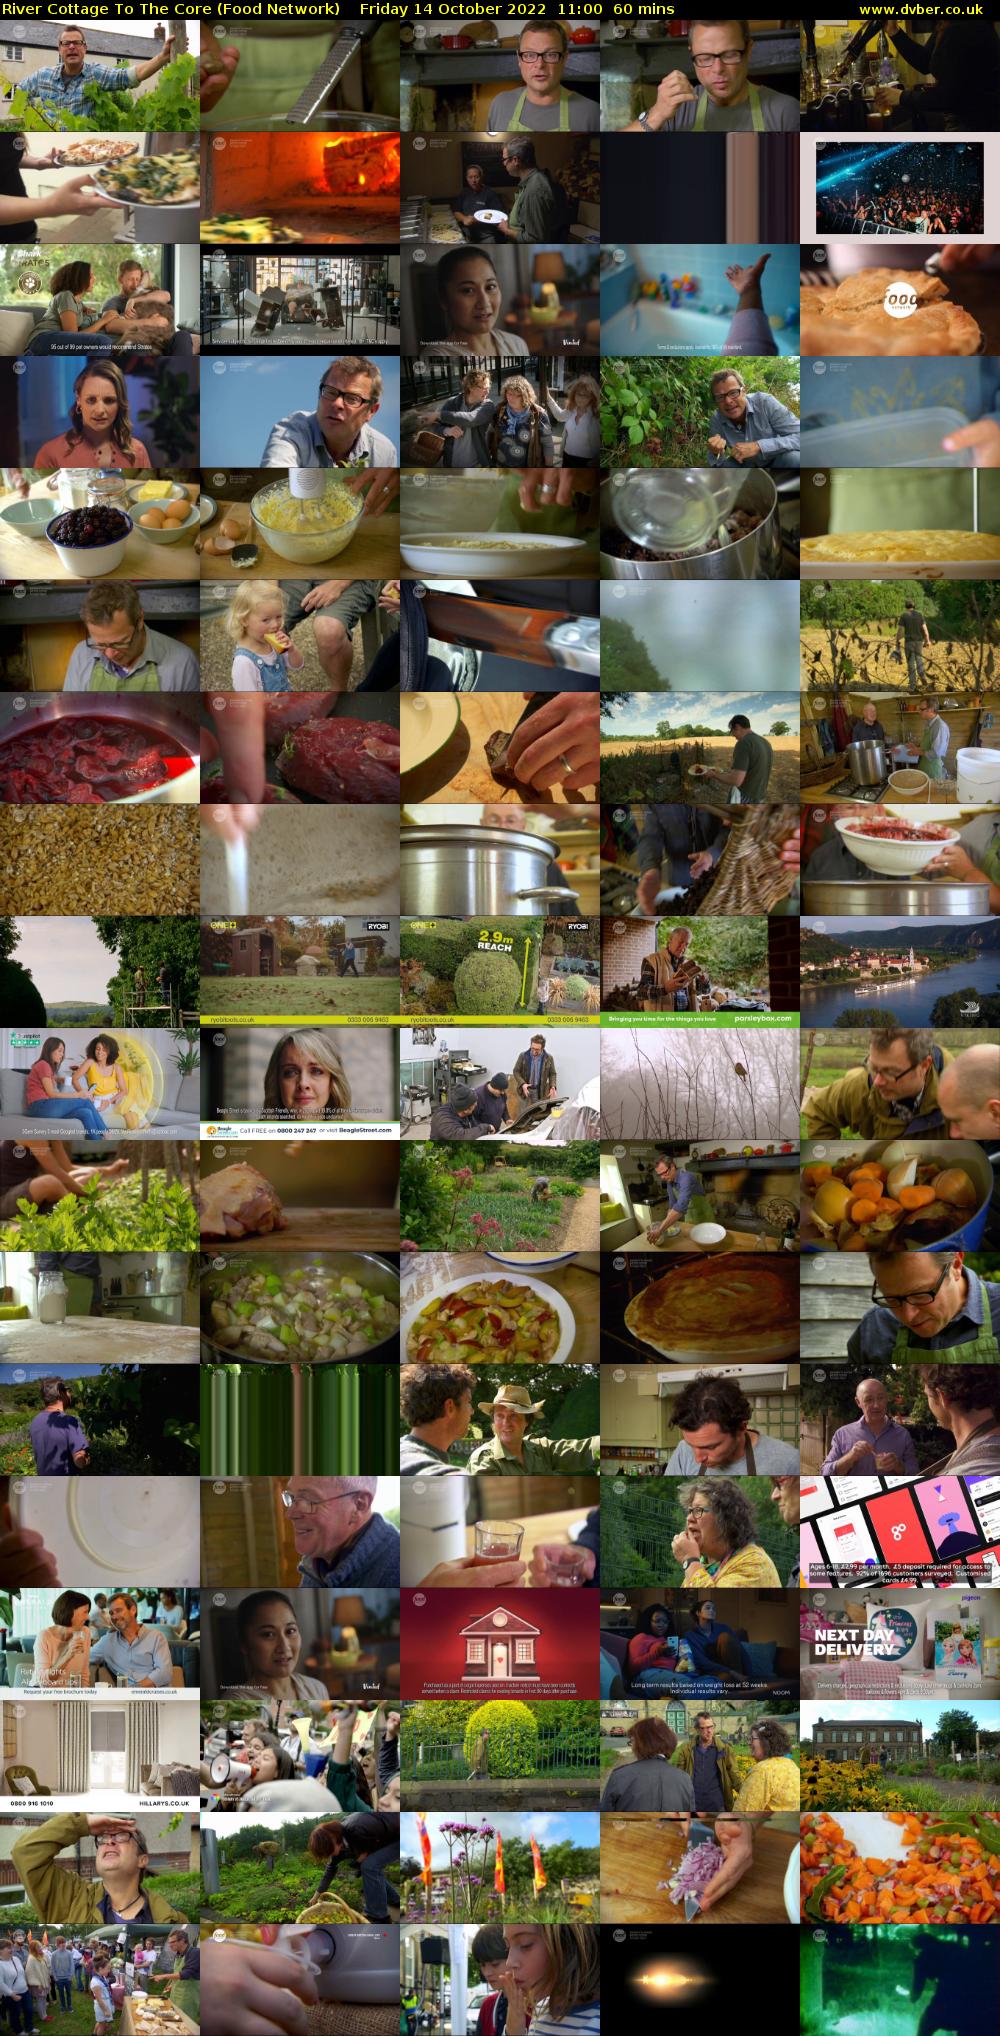 River Cottage To The Core (Food Network) Friday 14 October 2022 11:00 - 12:00